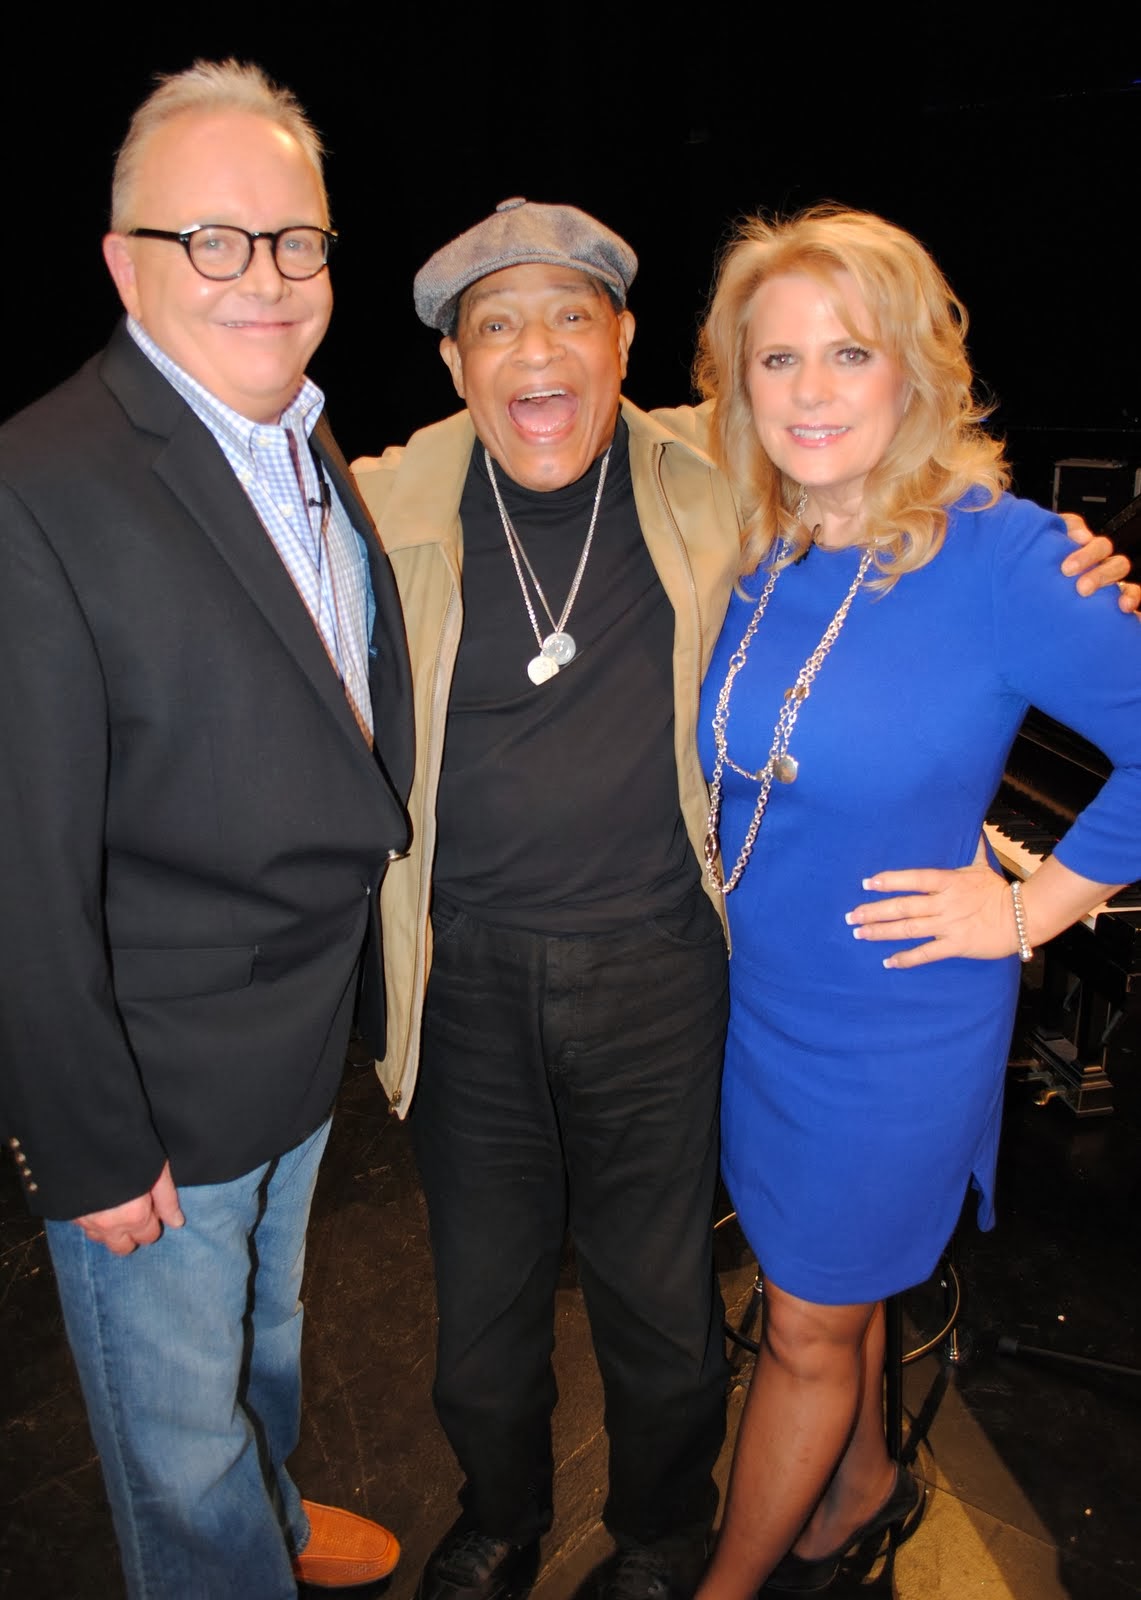 Al Jarreau, 7 Time Grammy® Winner performed live and discussed his remarkable life and career with Gary and Kelly on the show November 23, 2013.